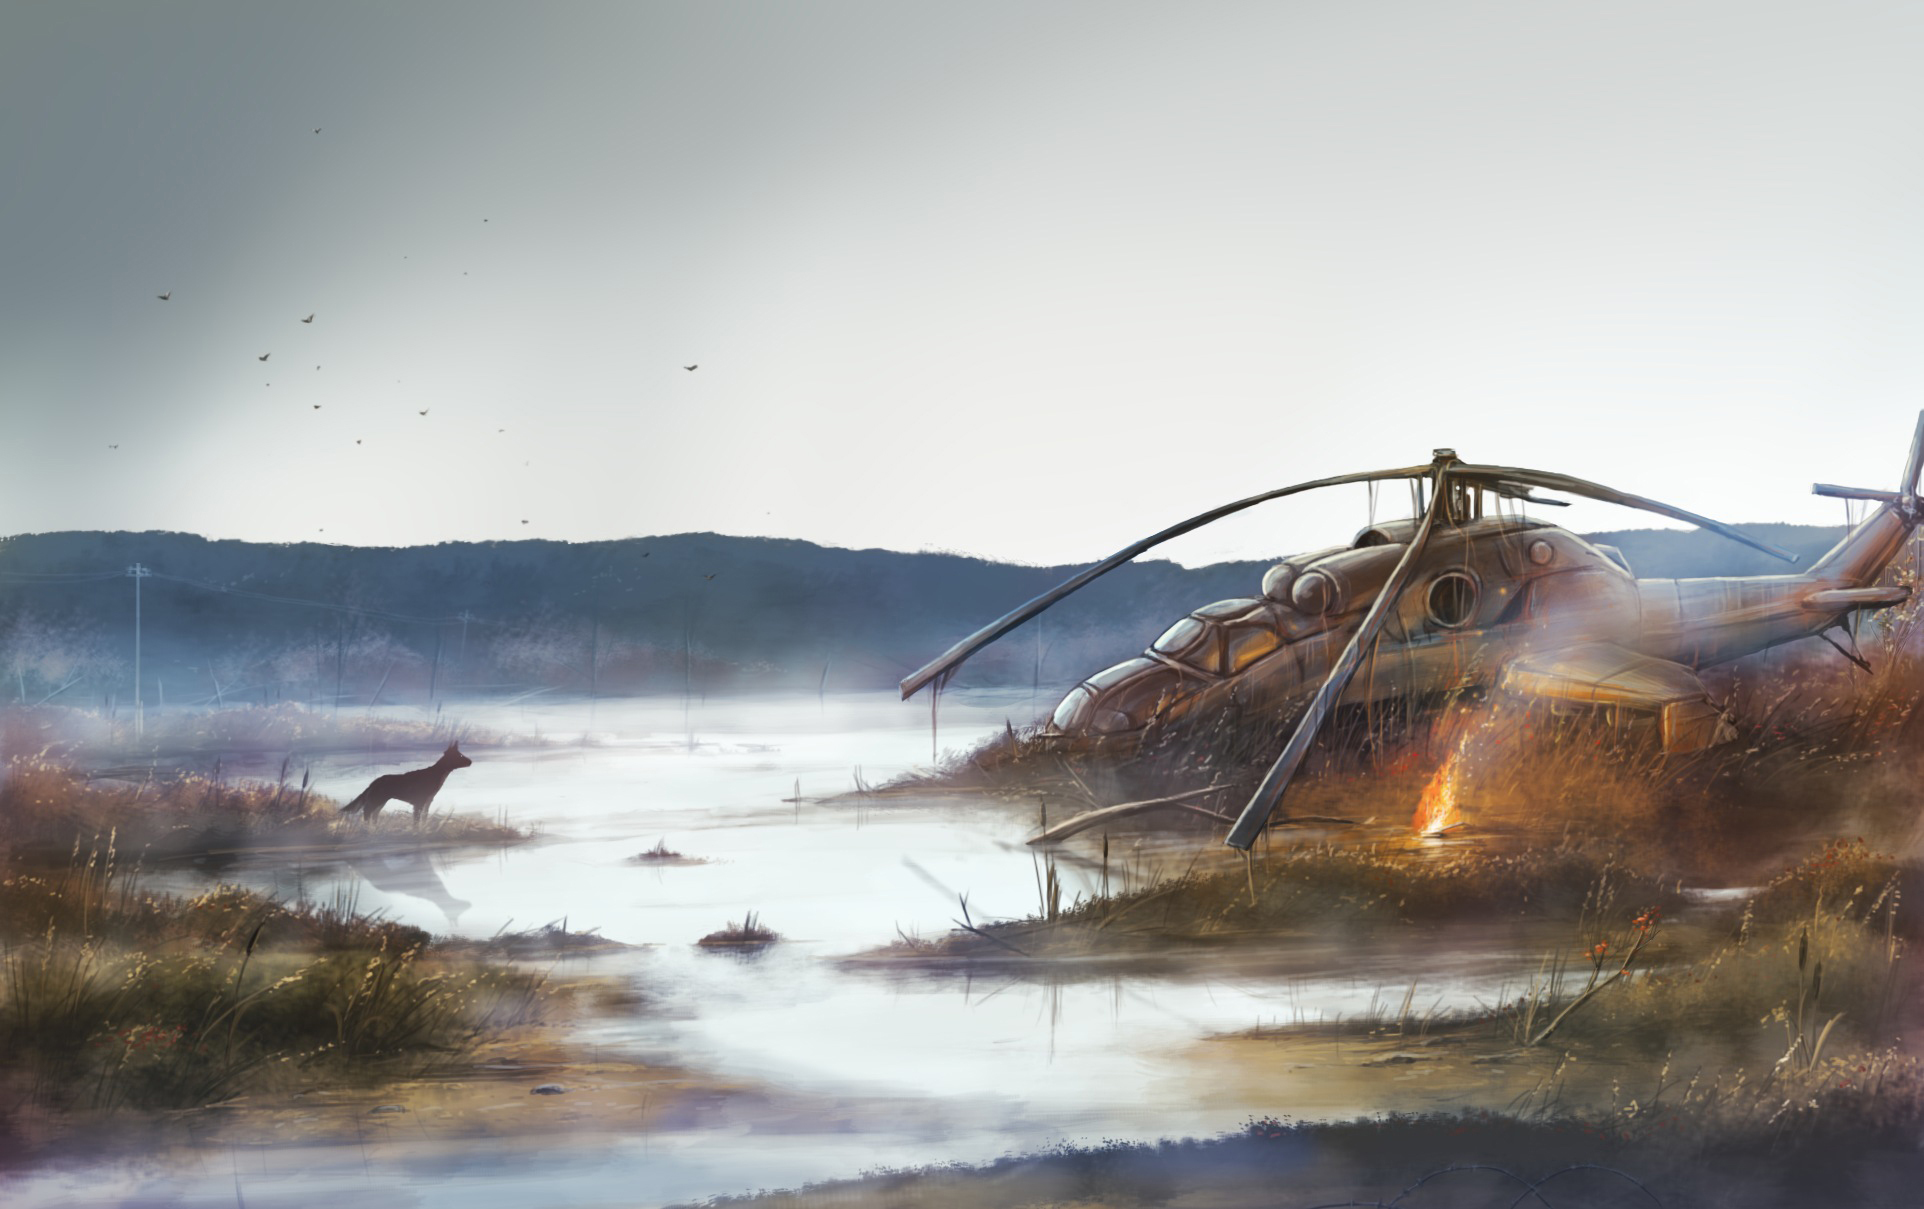 GoodFon.com - Free Wallpapers, download. swamp, dog, helicopter, pustosh. 